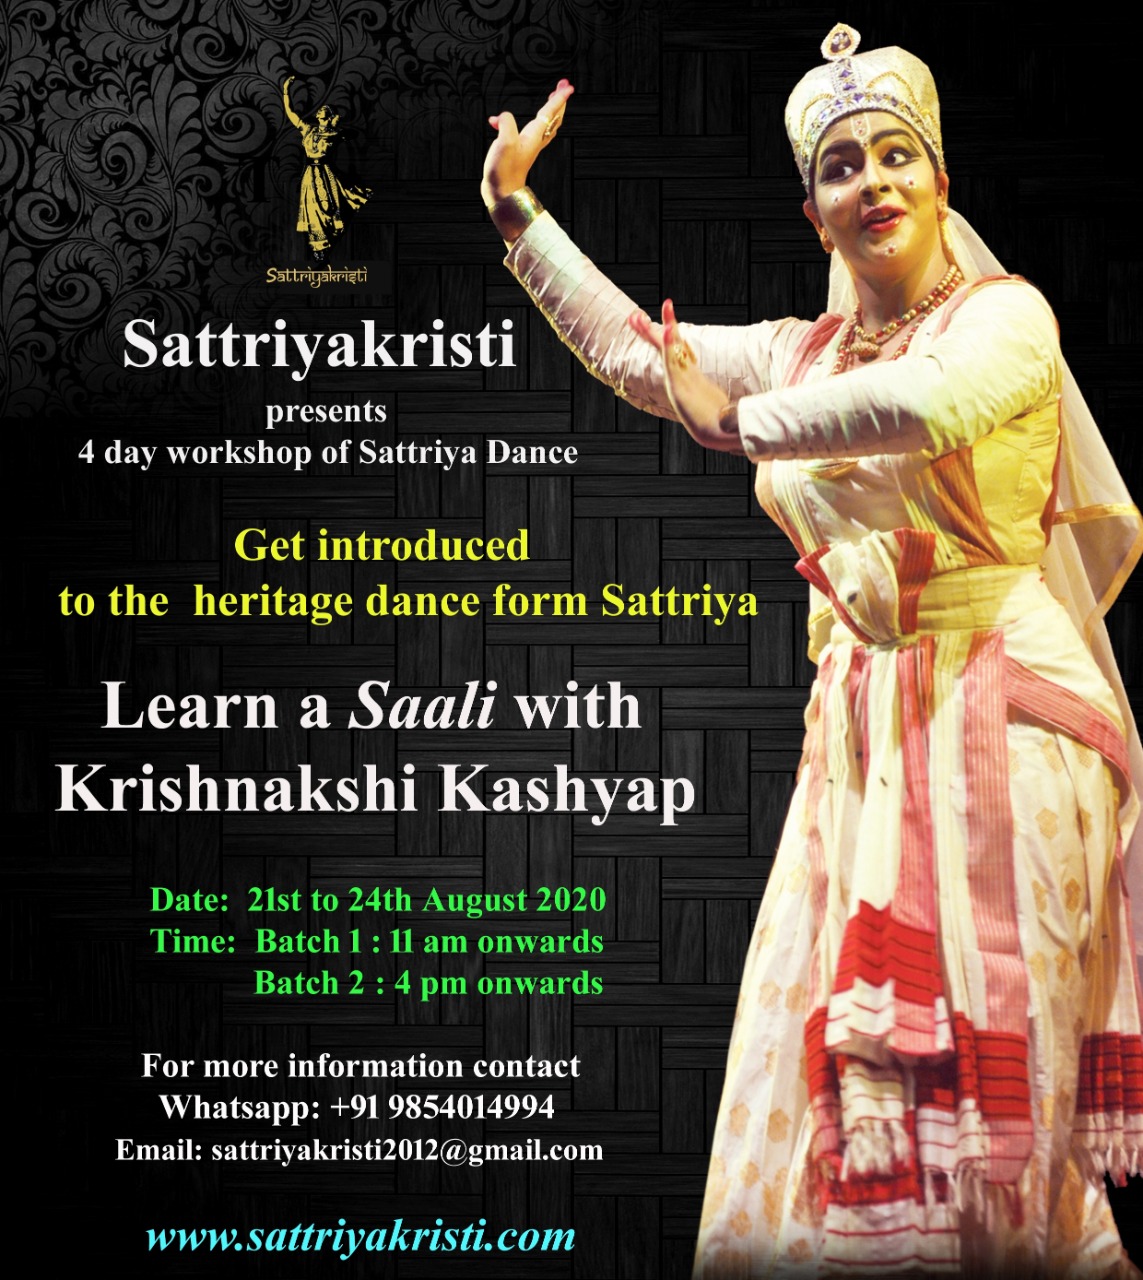 Get introduced to the heritage dance form Sattriya